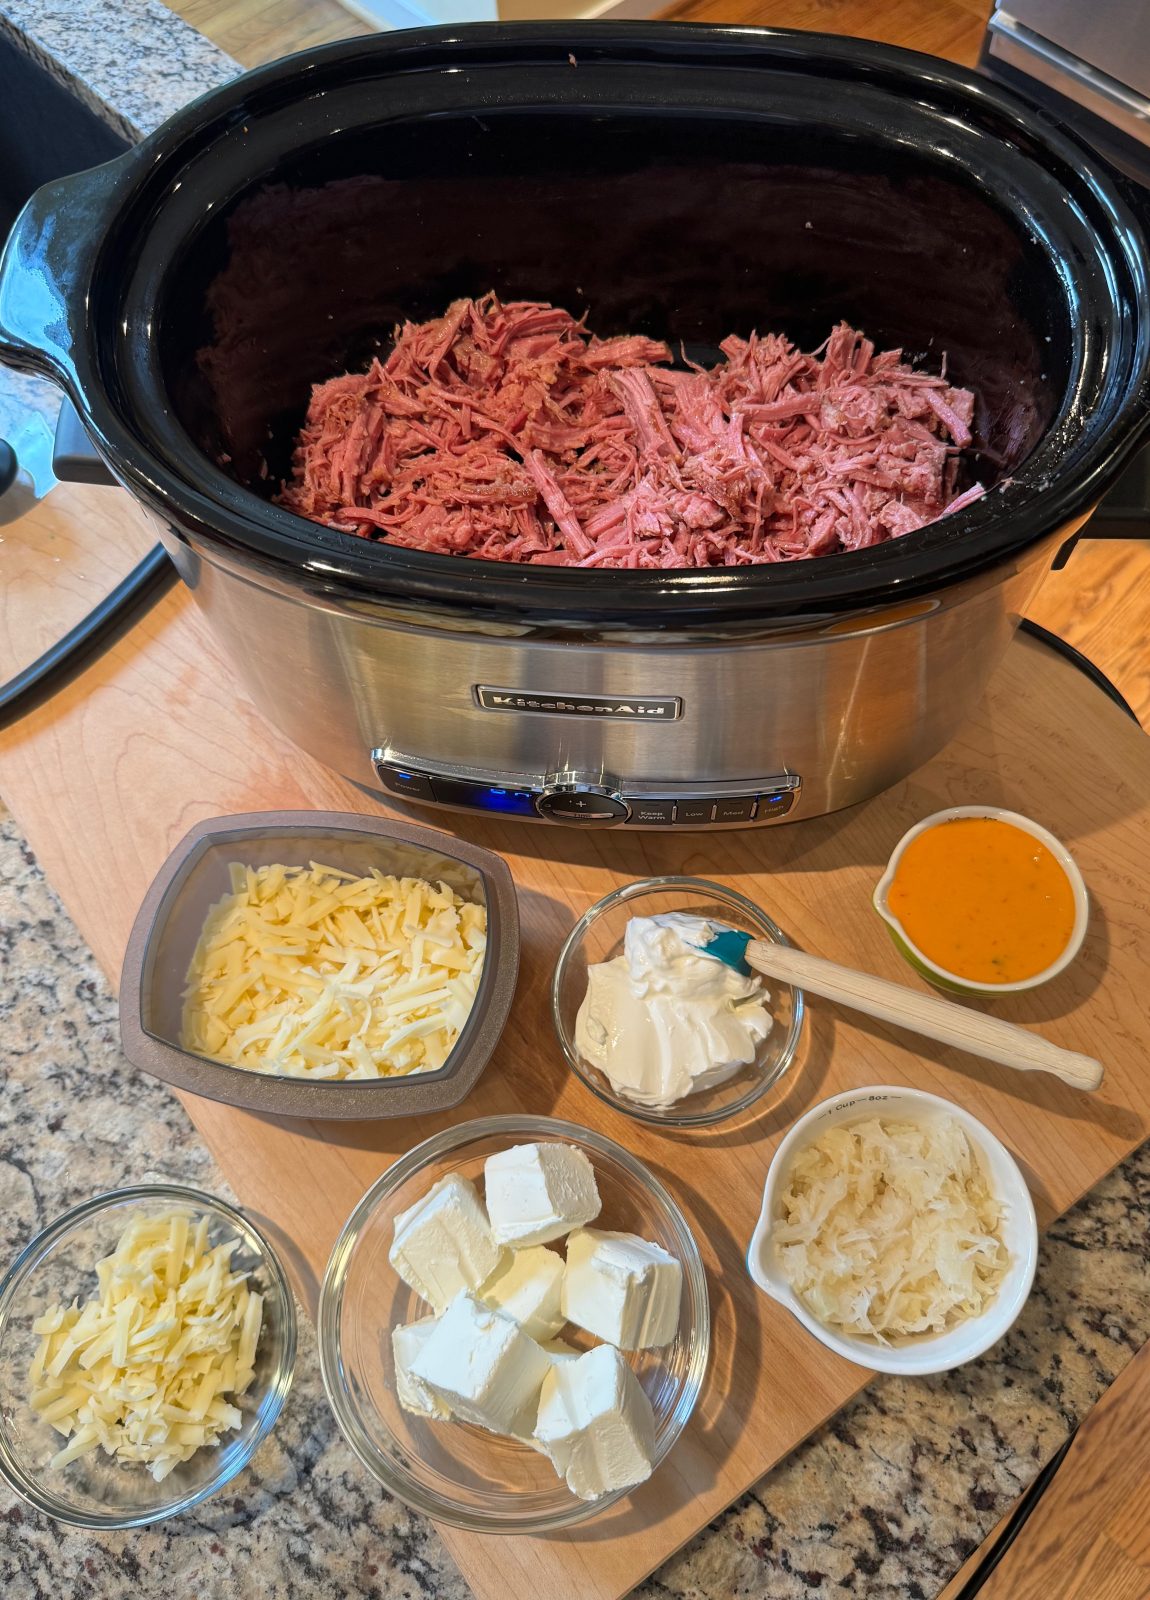 All the ingredients to make Slow Cooker Reuben Dip.  In the back is a KitchenAid slow cooker with shredded corned beef.  In front on a wooden board are small dishes of shredded swiss cheese, cream cheese chunks, sour cream and Russian Dressing
